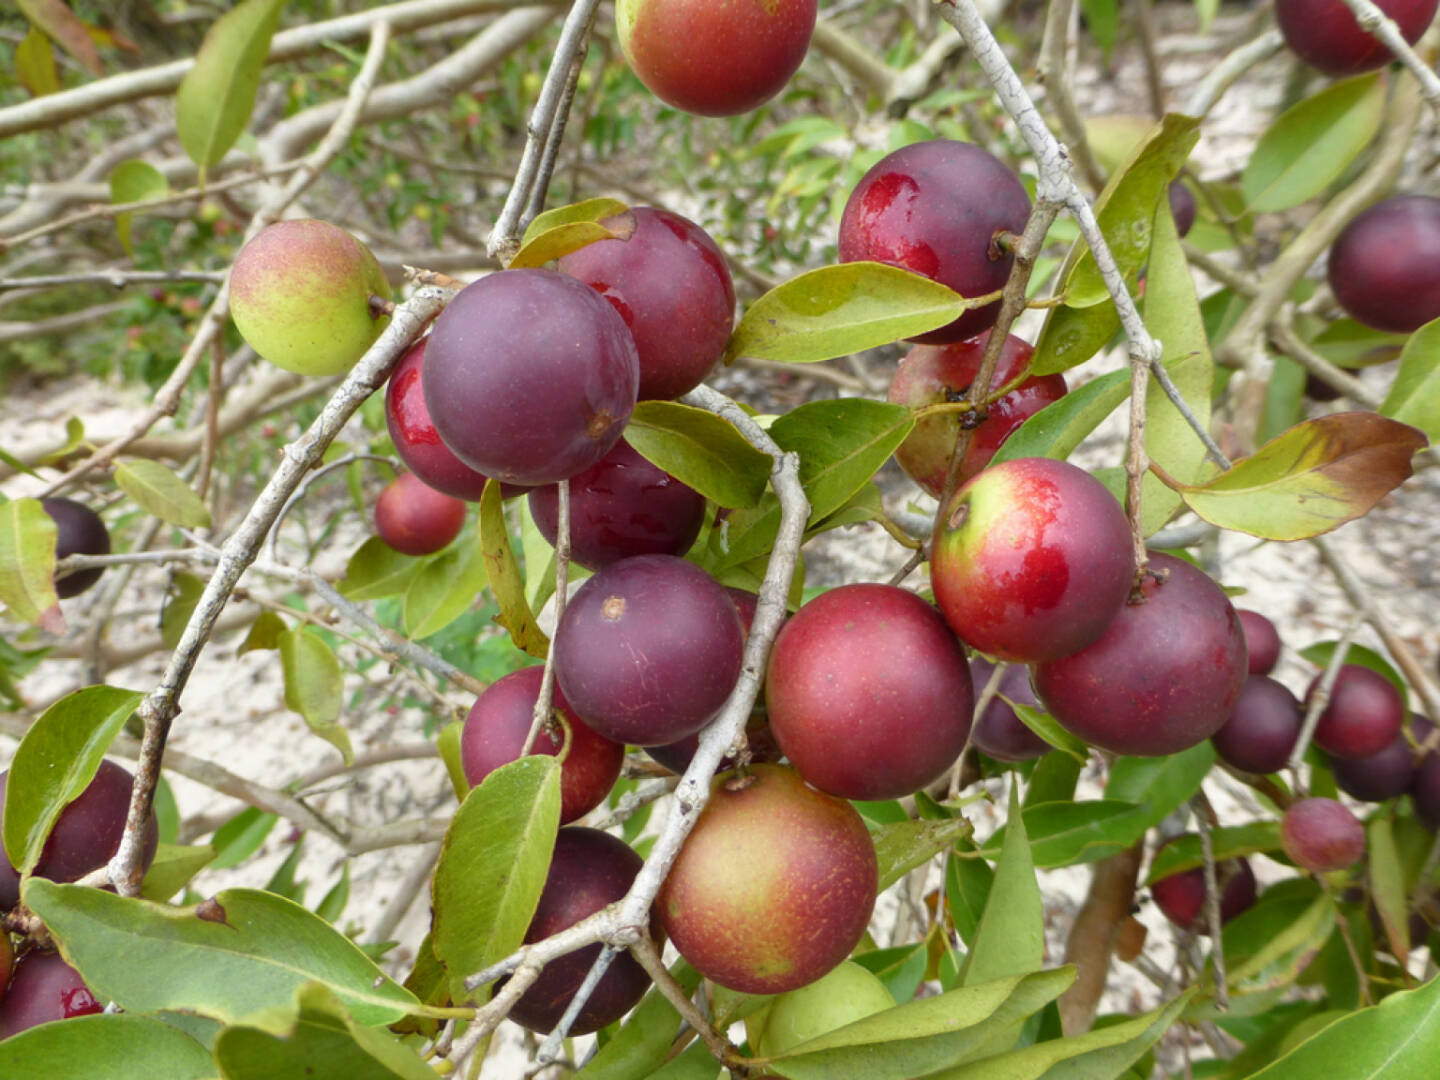 Camu Camu, Superfruit, http://www.shutterstock.com/de/pic-184176542/stock-photo-myrciaria-dubia-commonly-known-as-camu-camu-camucamu-cacari-and-camocamo-is-a-small-approx.html